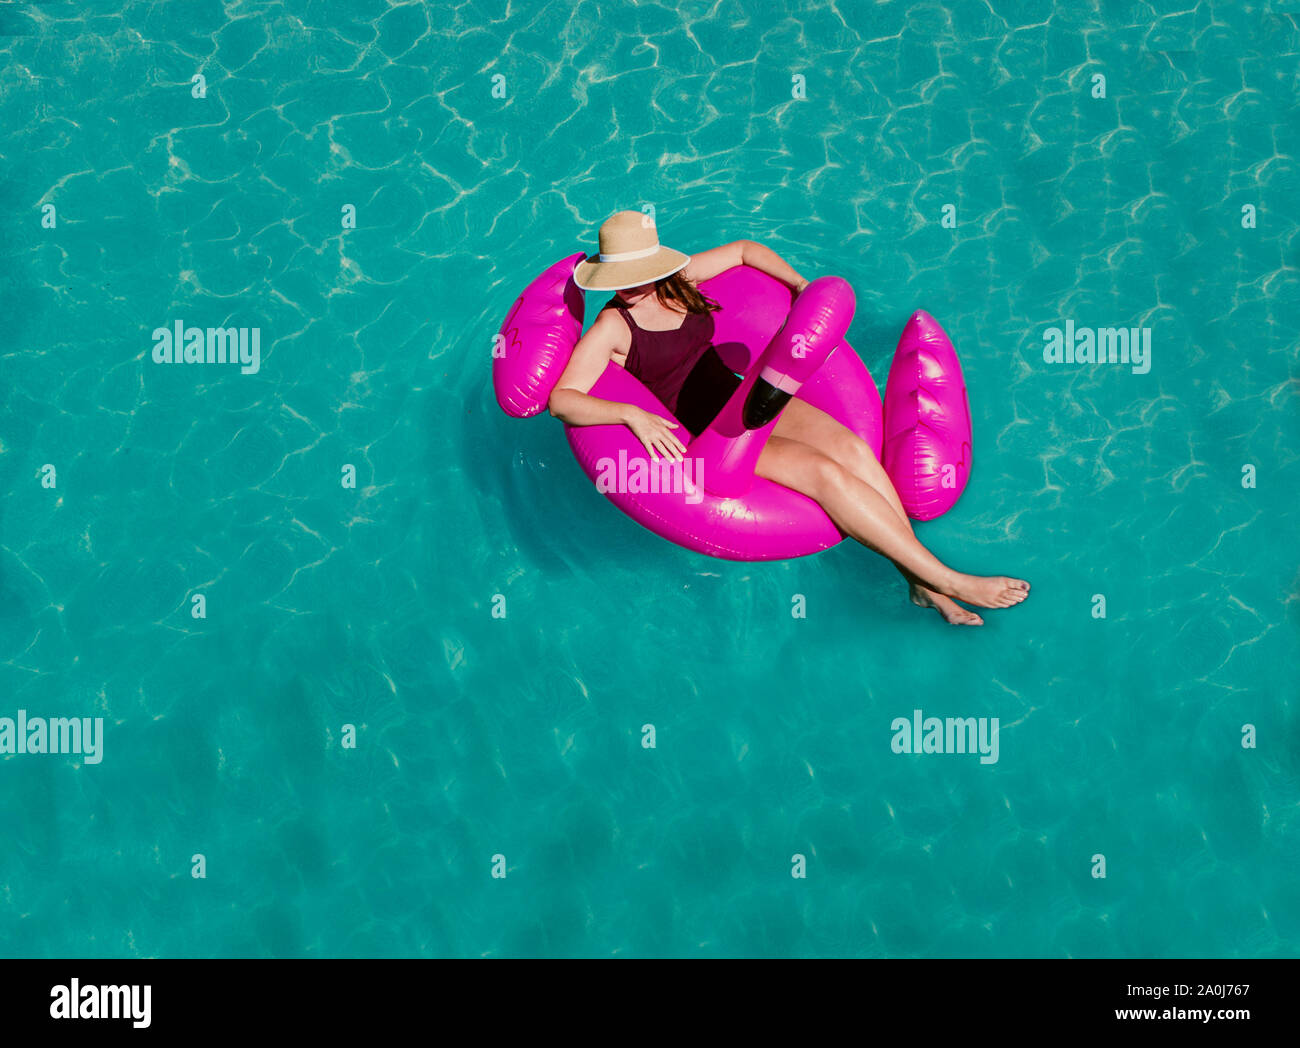 Top view of woman floating on inflatable pink flamingo in a pool. Stock Photo